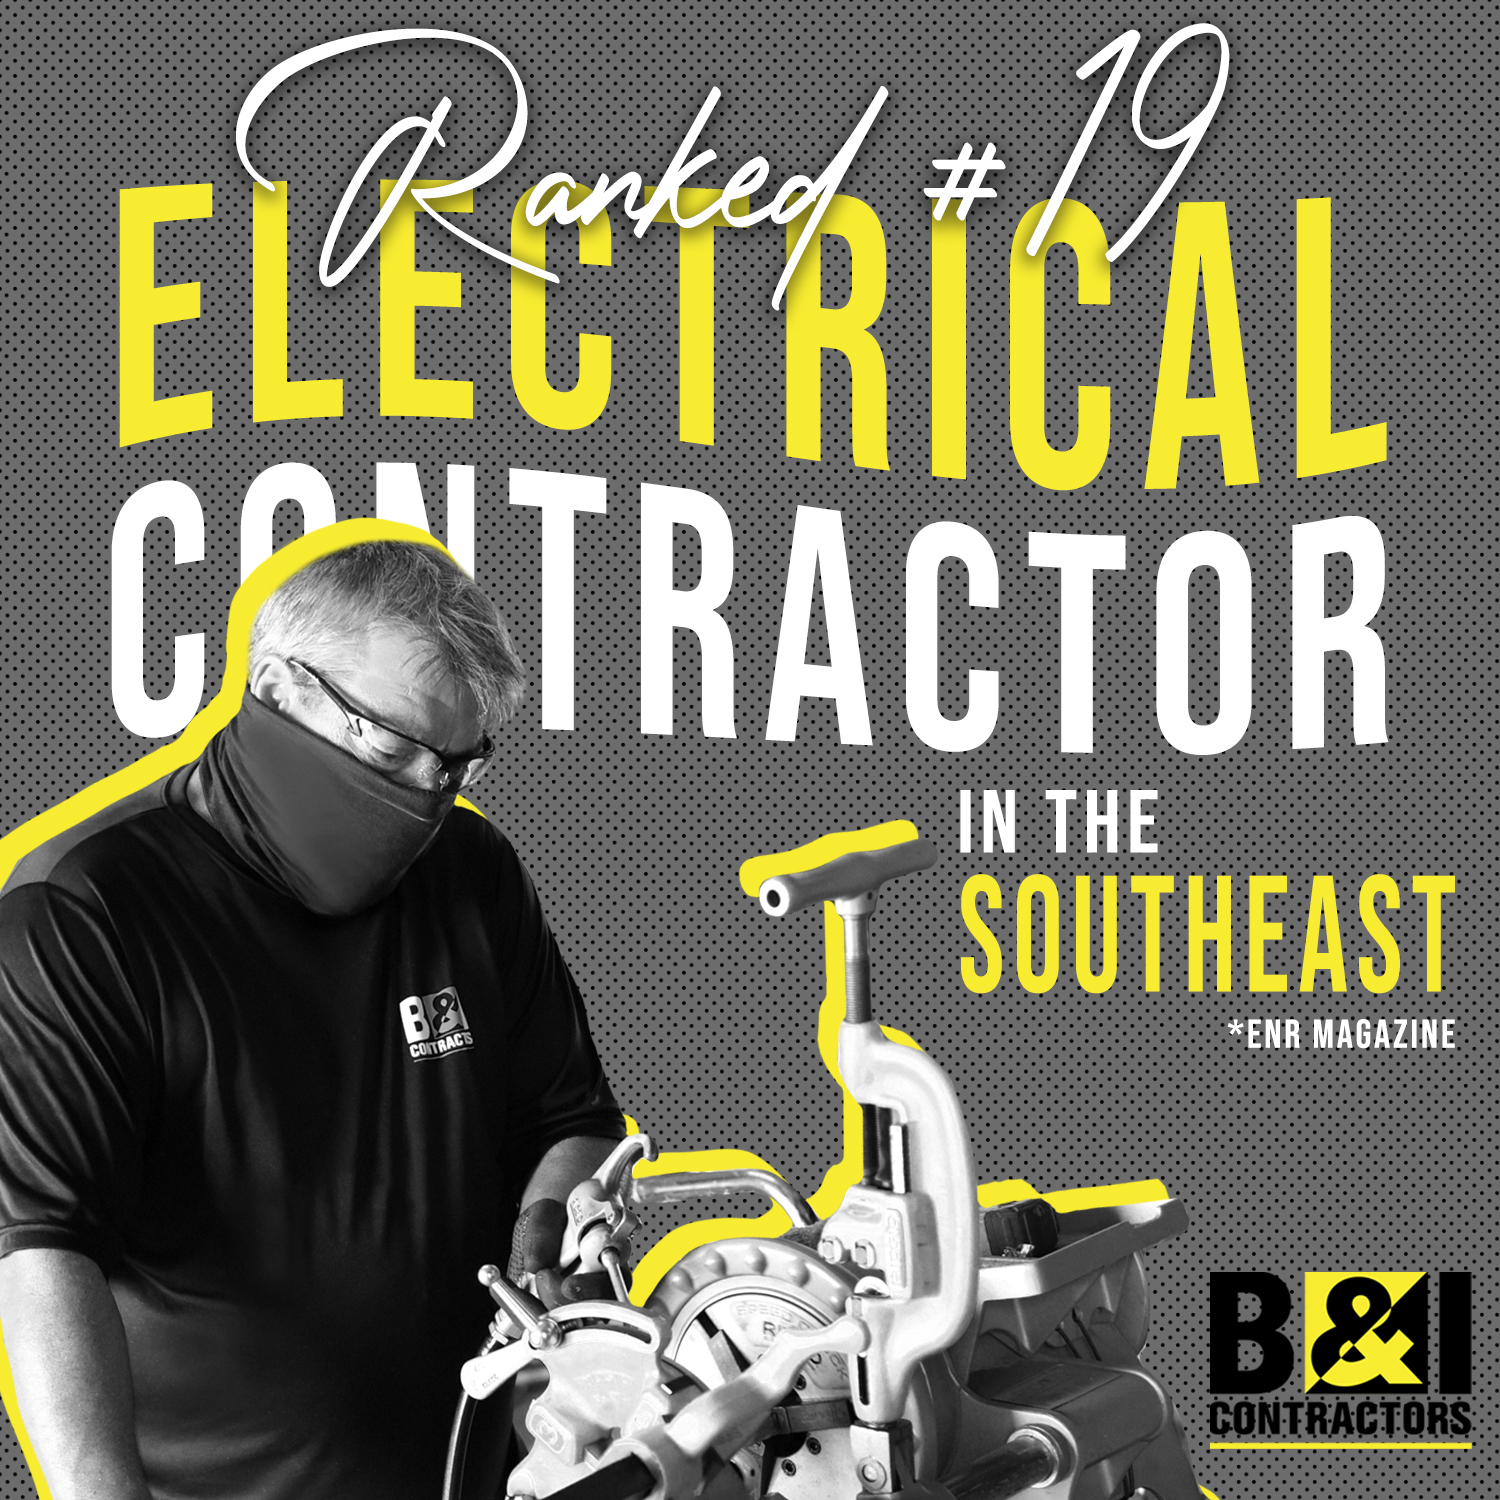 B&I Ranked 19 Electrical Contractors in ENR Magazine